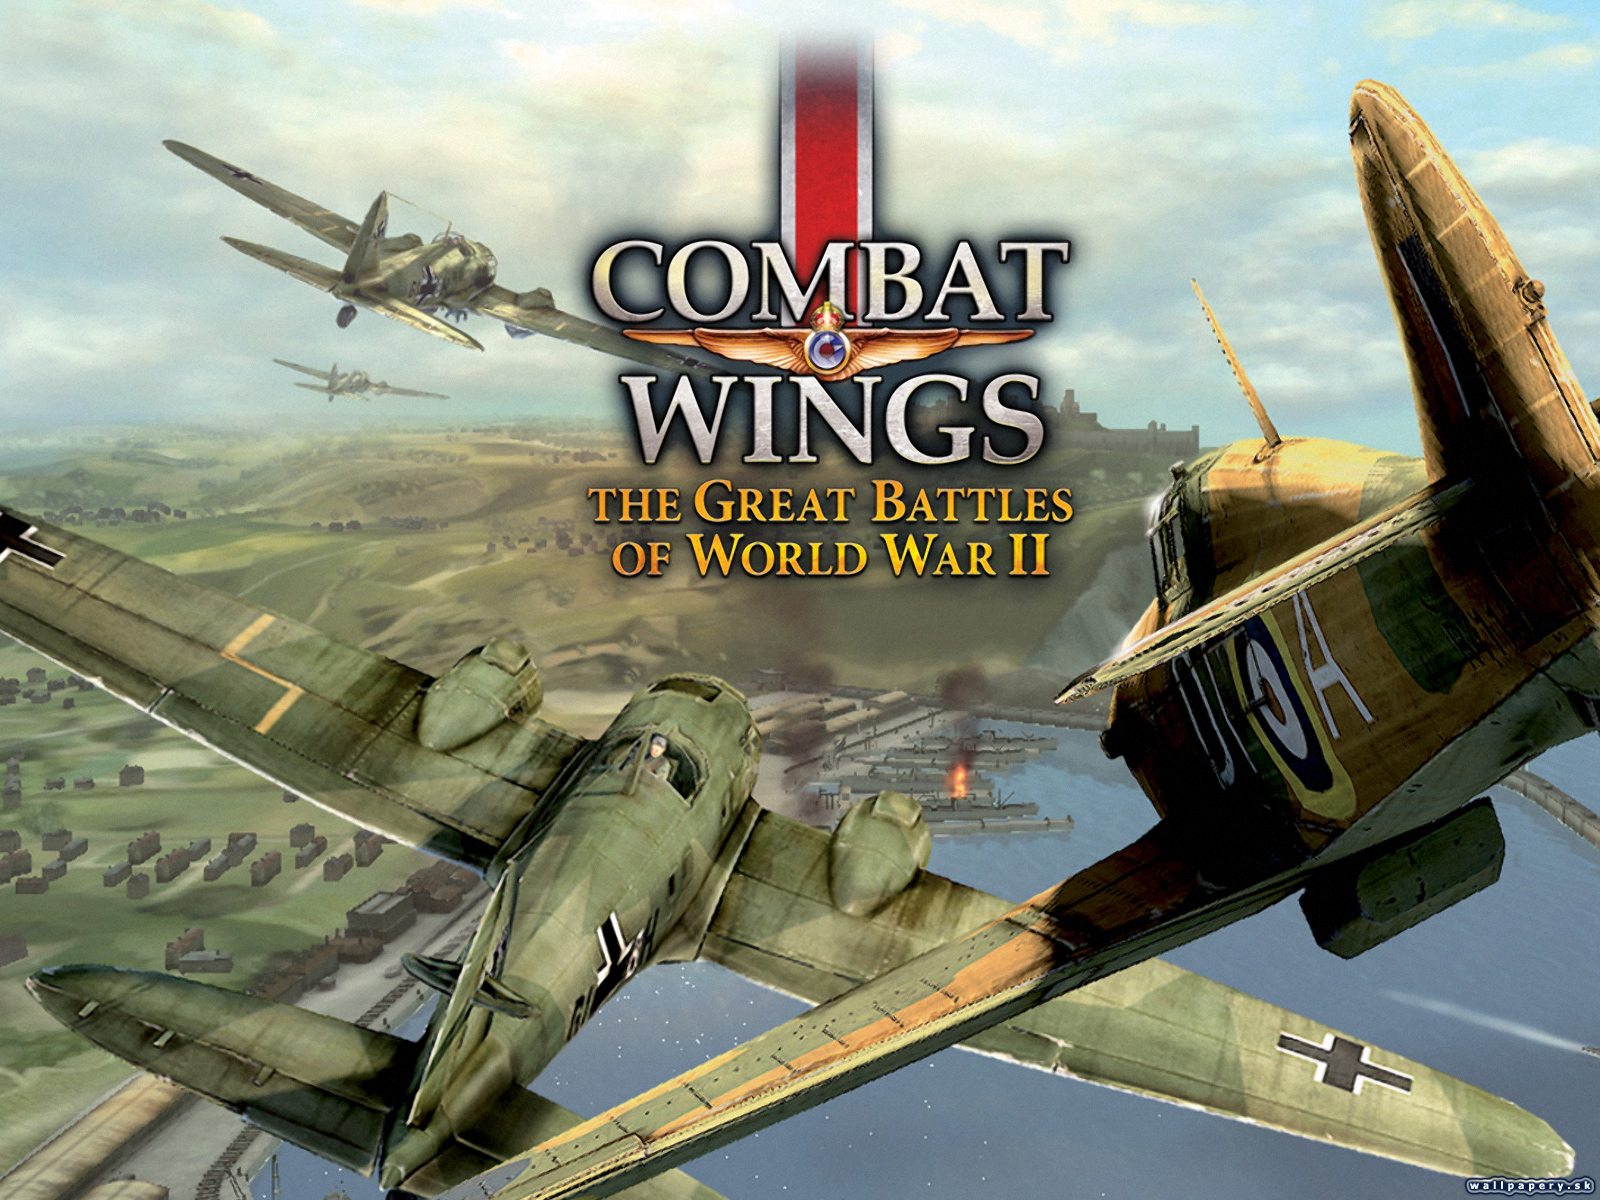 Combat Wings: The Great Battles of WWII - wallpaper 6